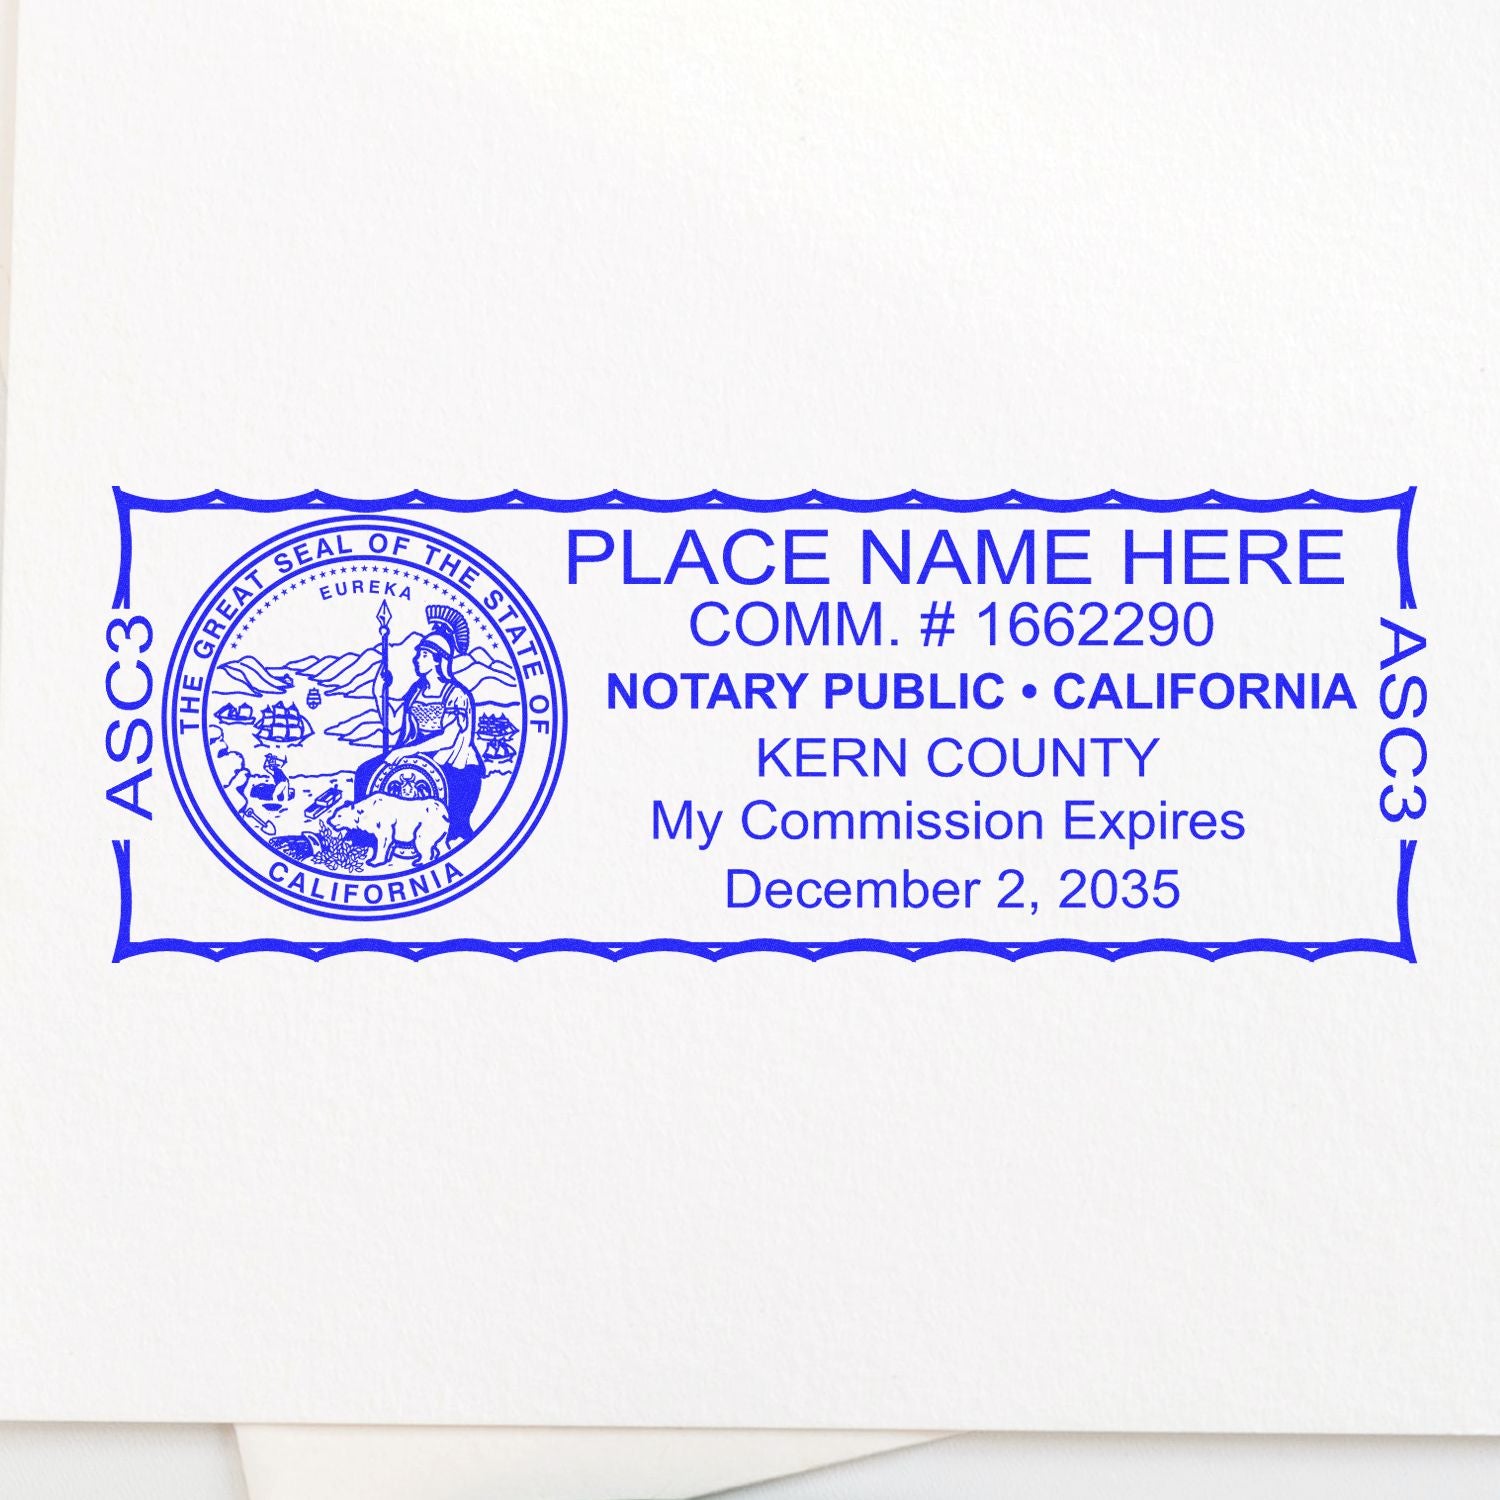 A photograph of the Heavy-Duty California Rectangular Notary Stamp stamp impression reveals a vivid, professional image of the on paper.